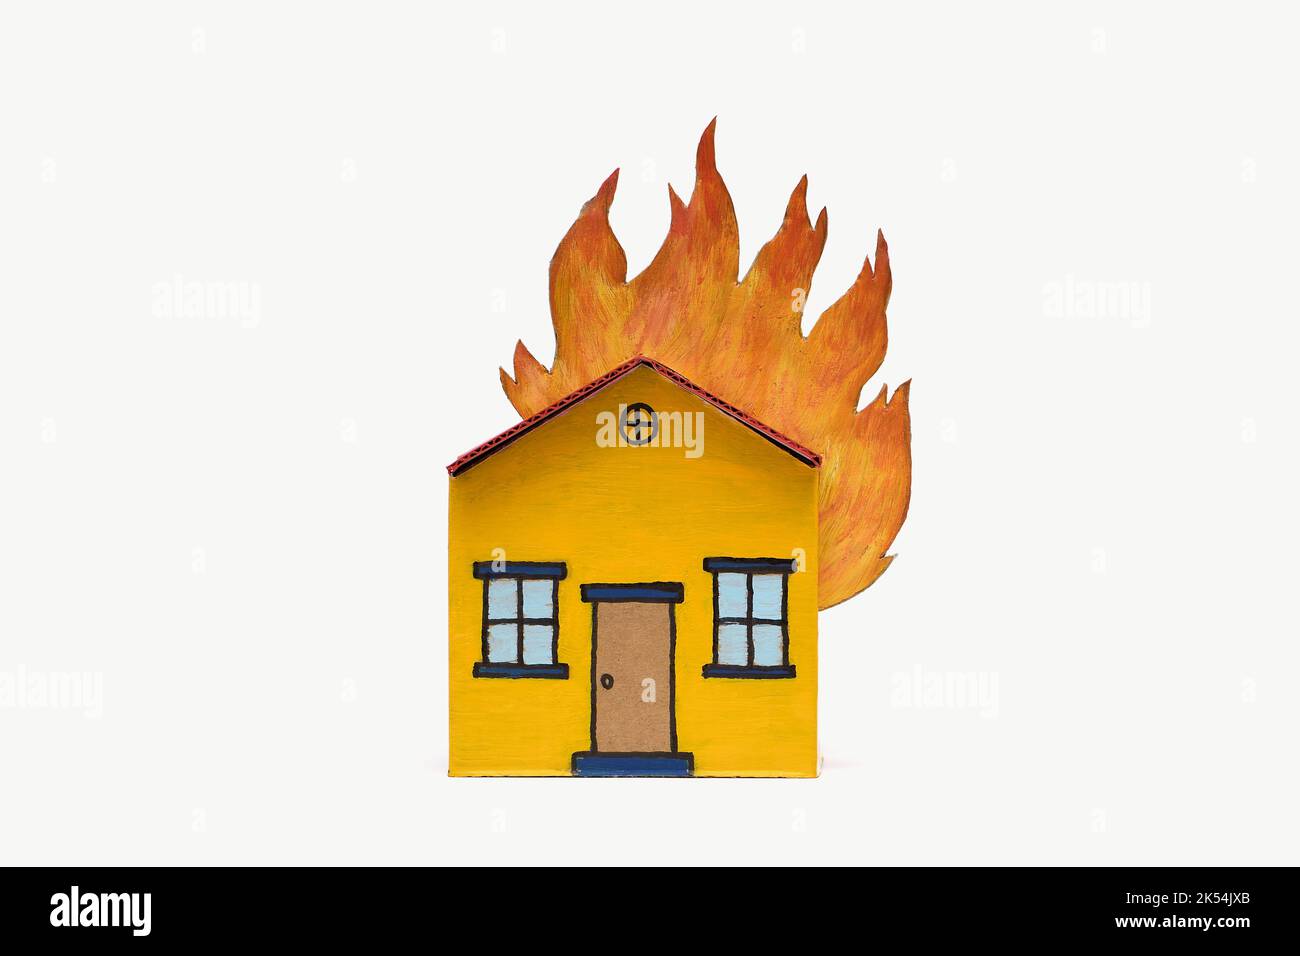 A yellow and red toy cardboard house with its roof on fire in the middle of frame isolated on a white background, captured in a studio Stock Photo